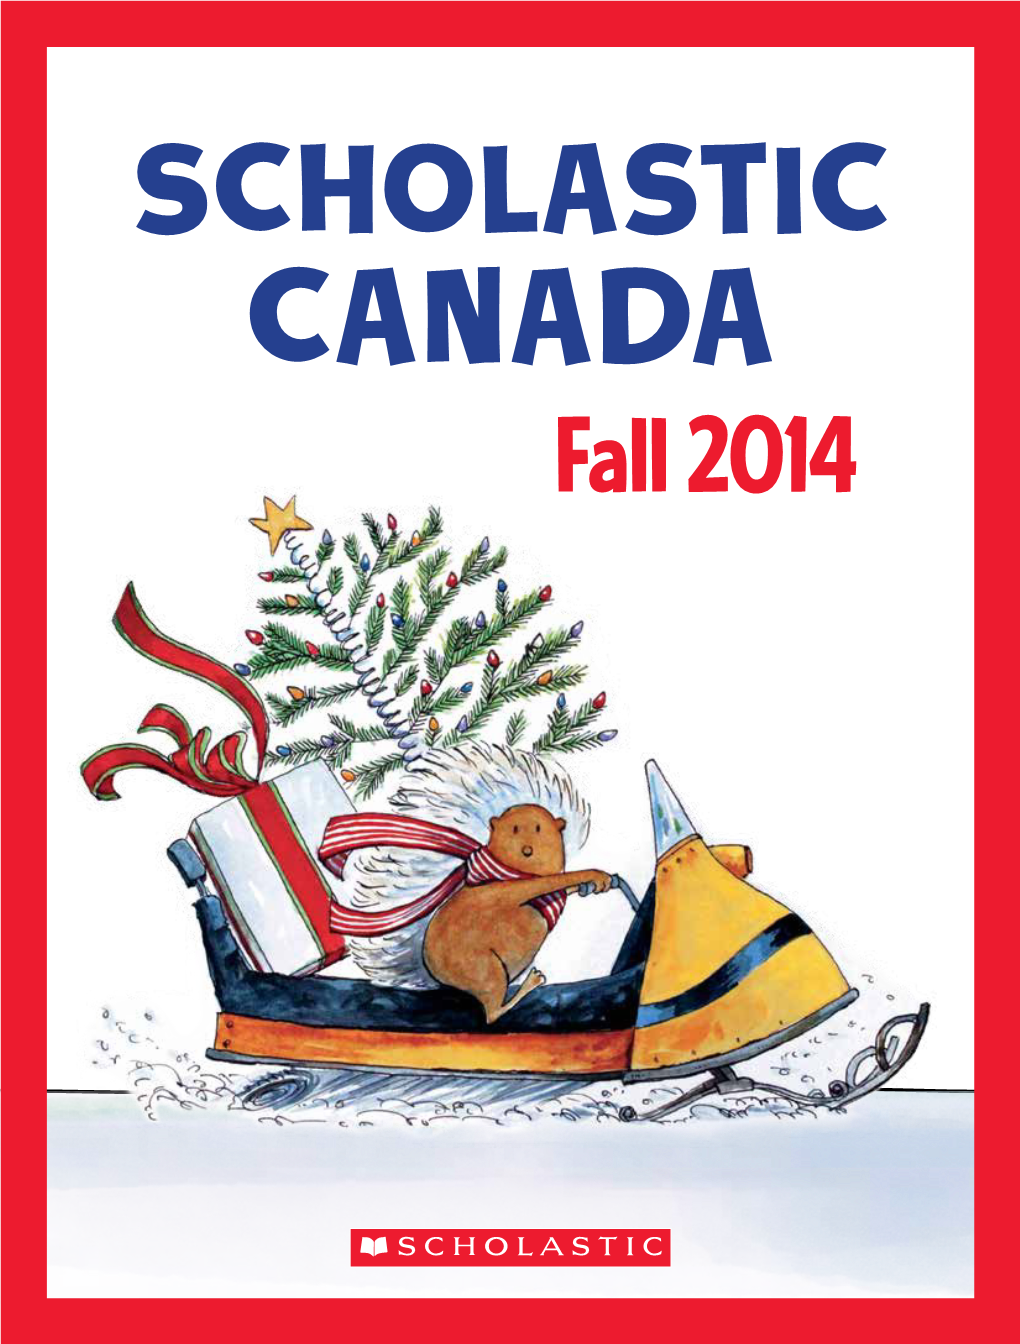 Fall 2014 Greet the Day the Canadian Way with This Follow-Up to Goodnight, Canada